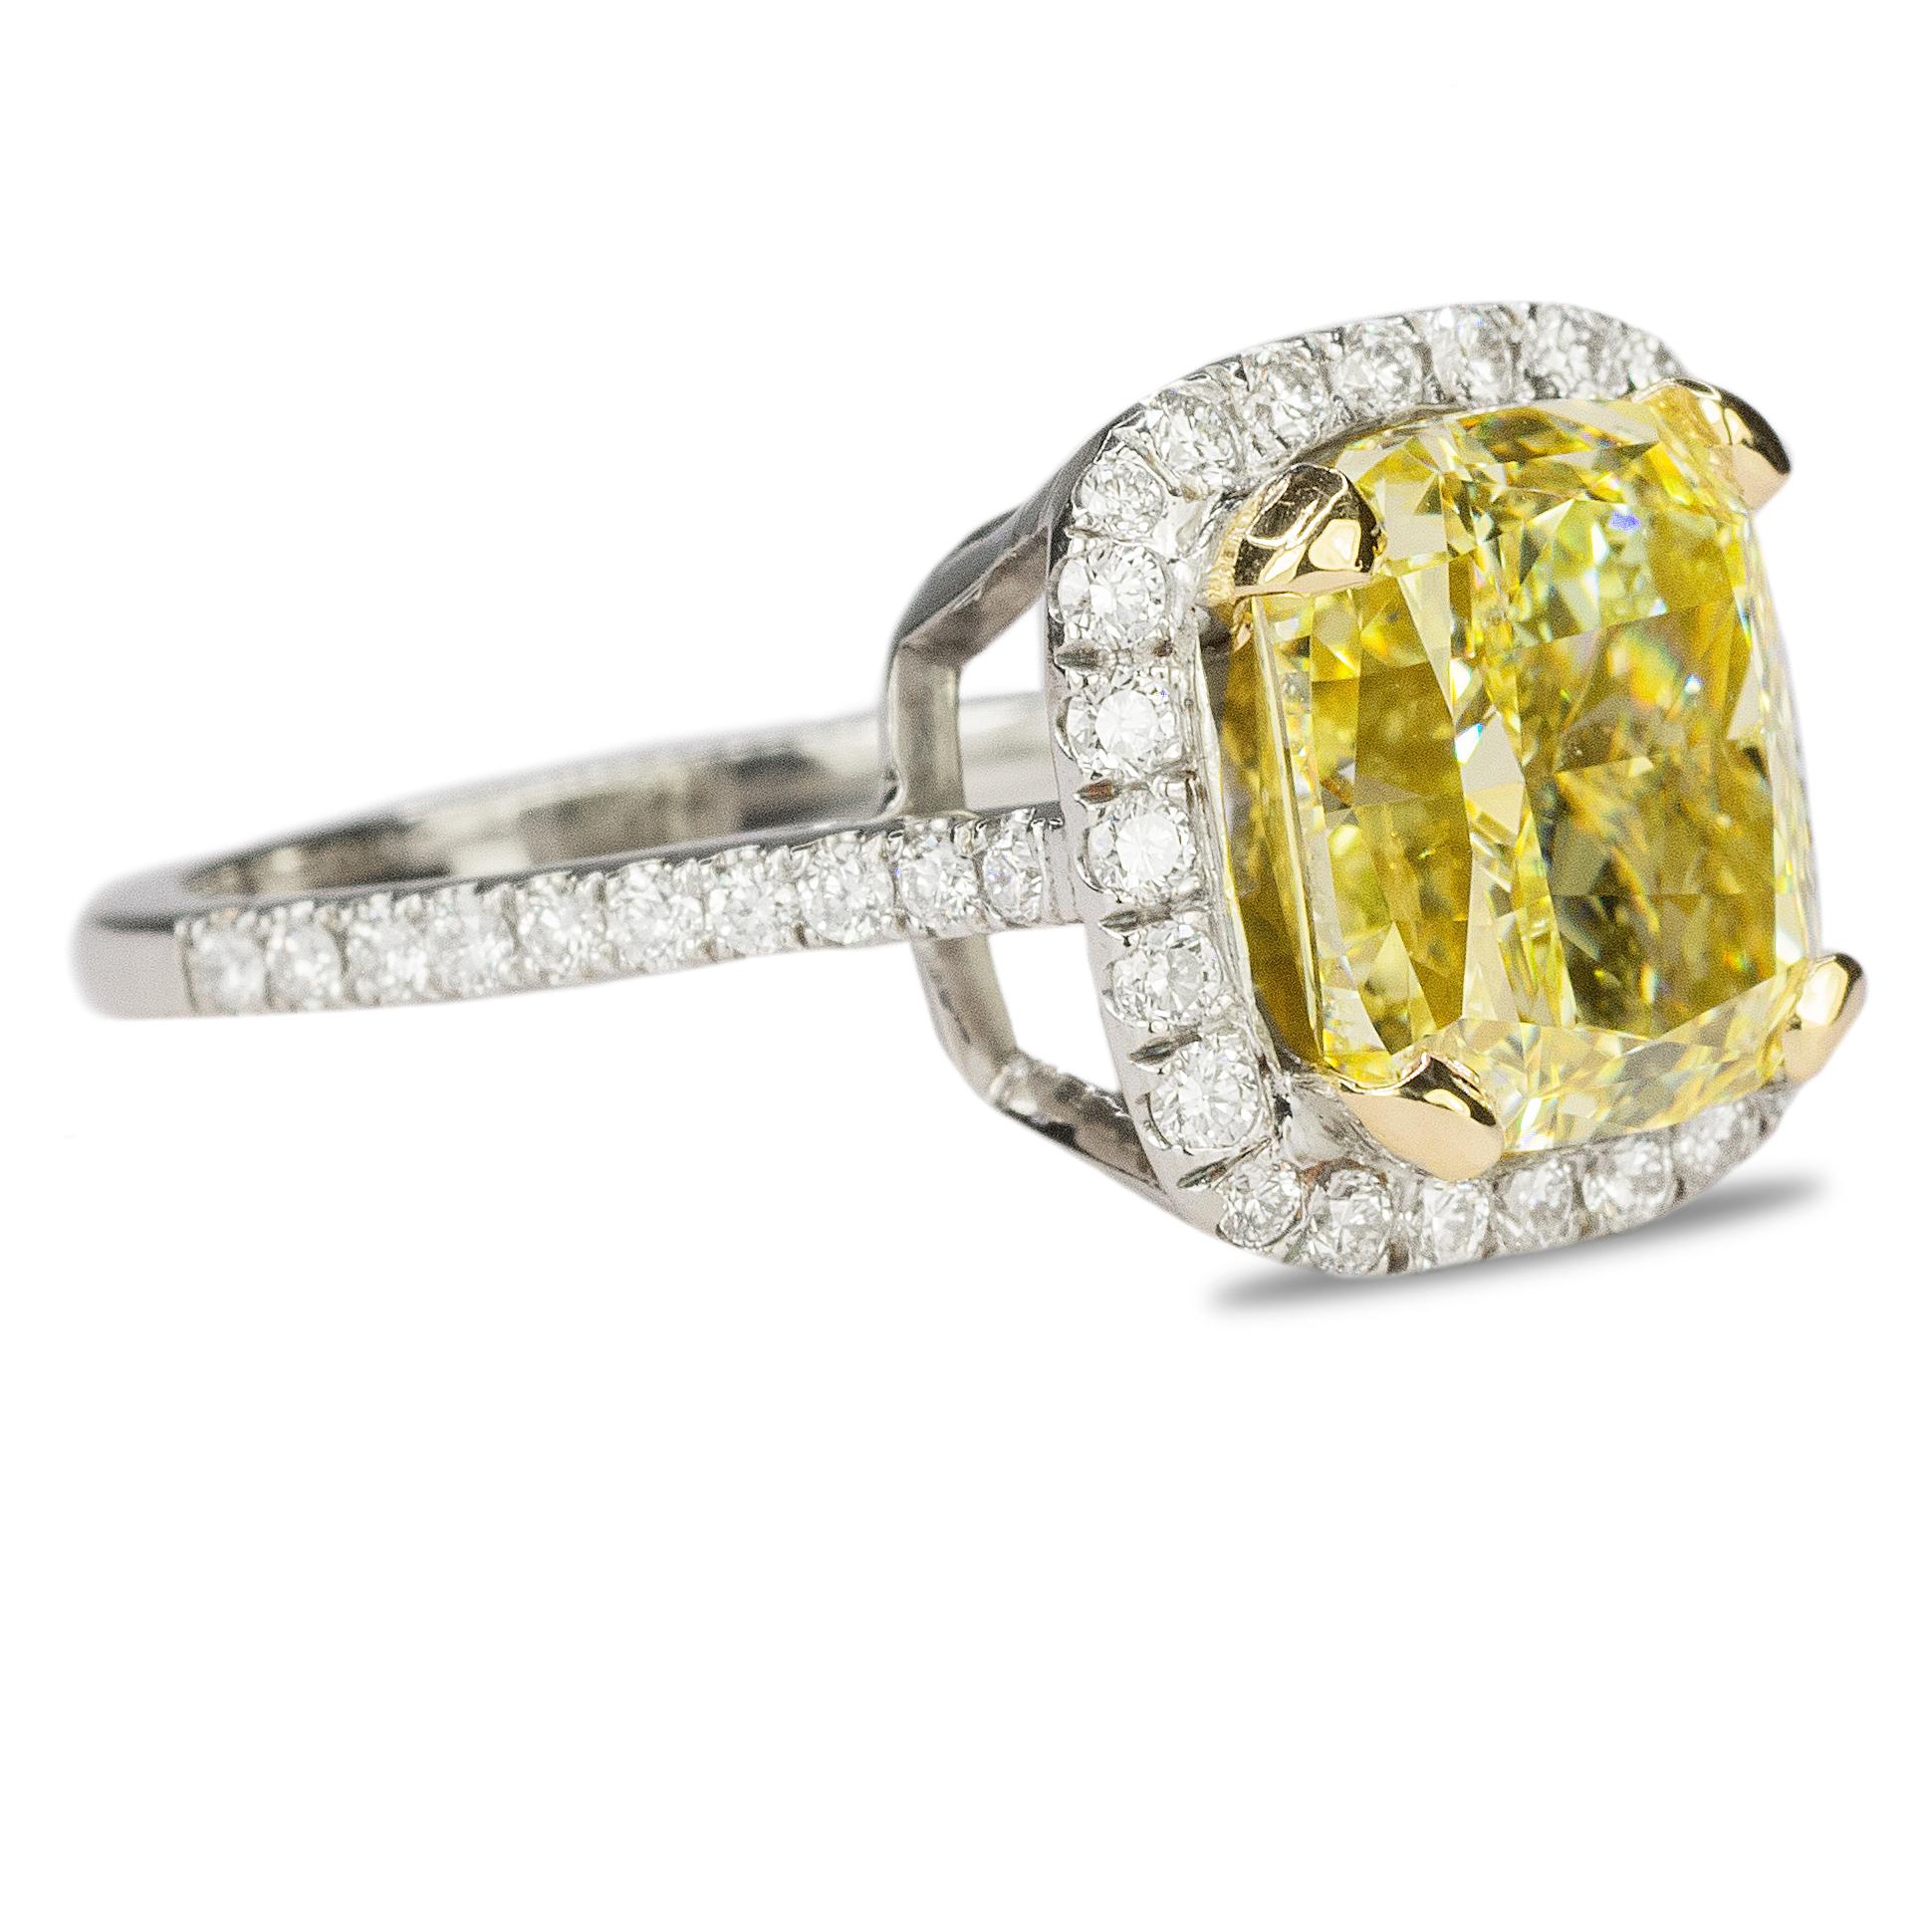 Ball of Sunshine, 18k Ring with GIA certified 4.46 carat cushion cut Fancy Intense Yellow,  VS2 clarity diamond and 0.68 carats of round white diamonds.  